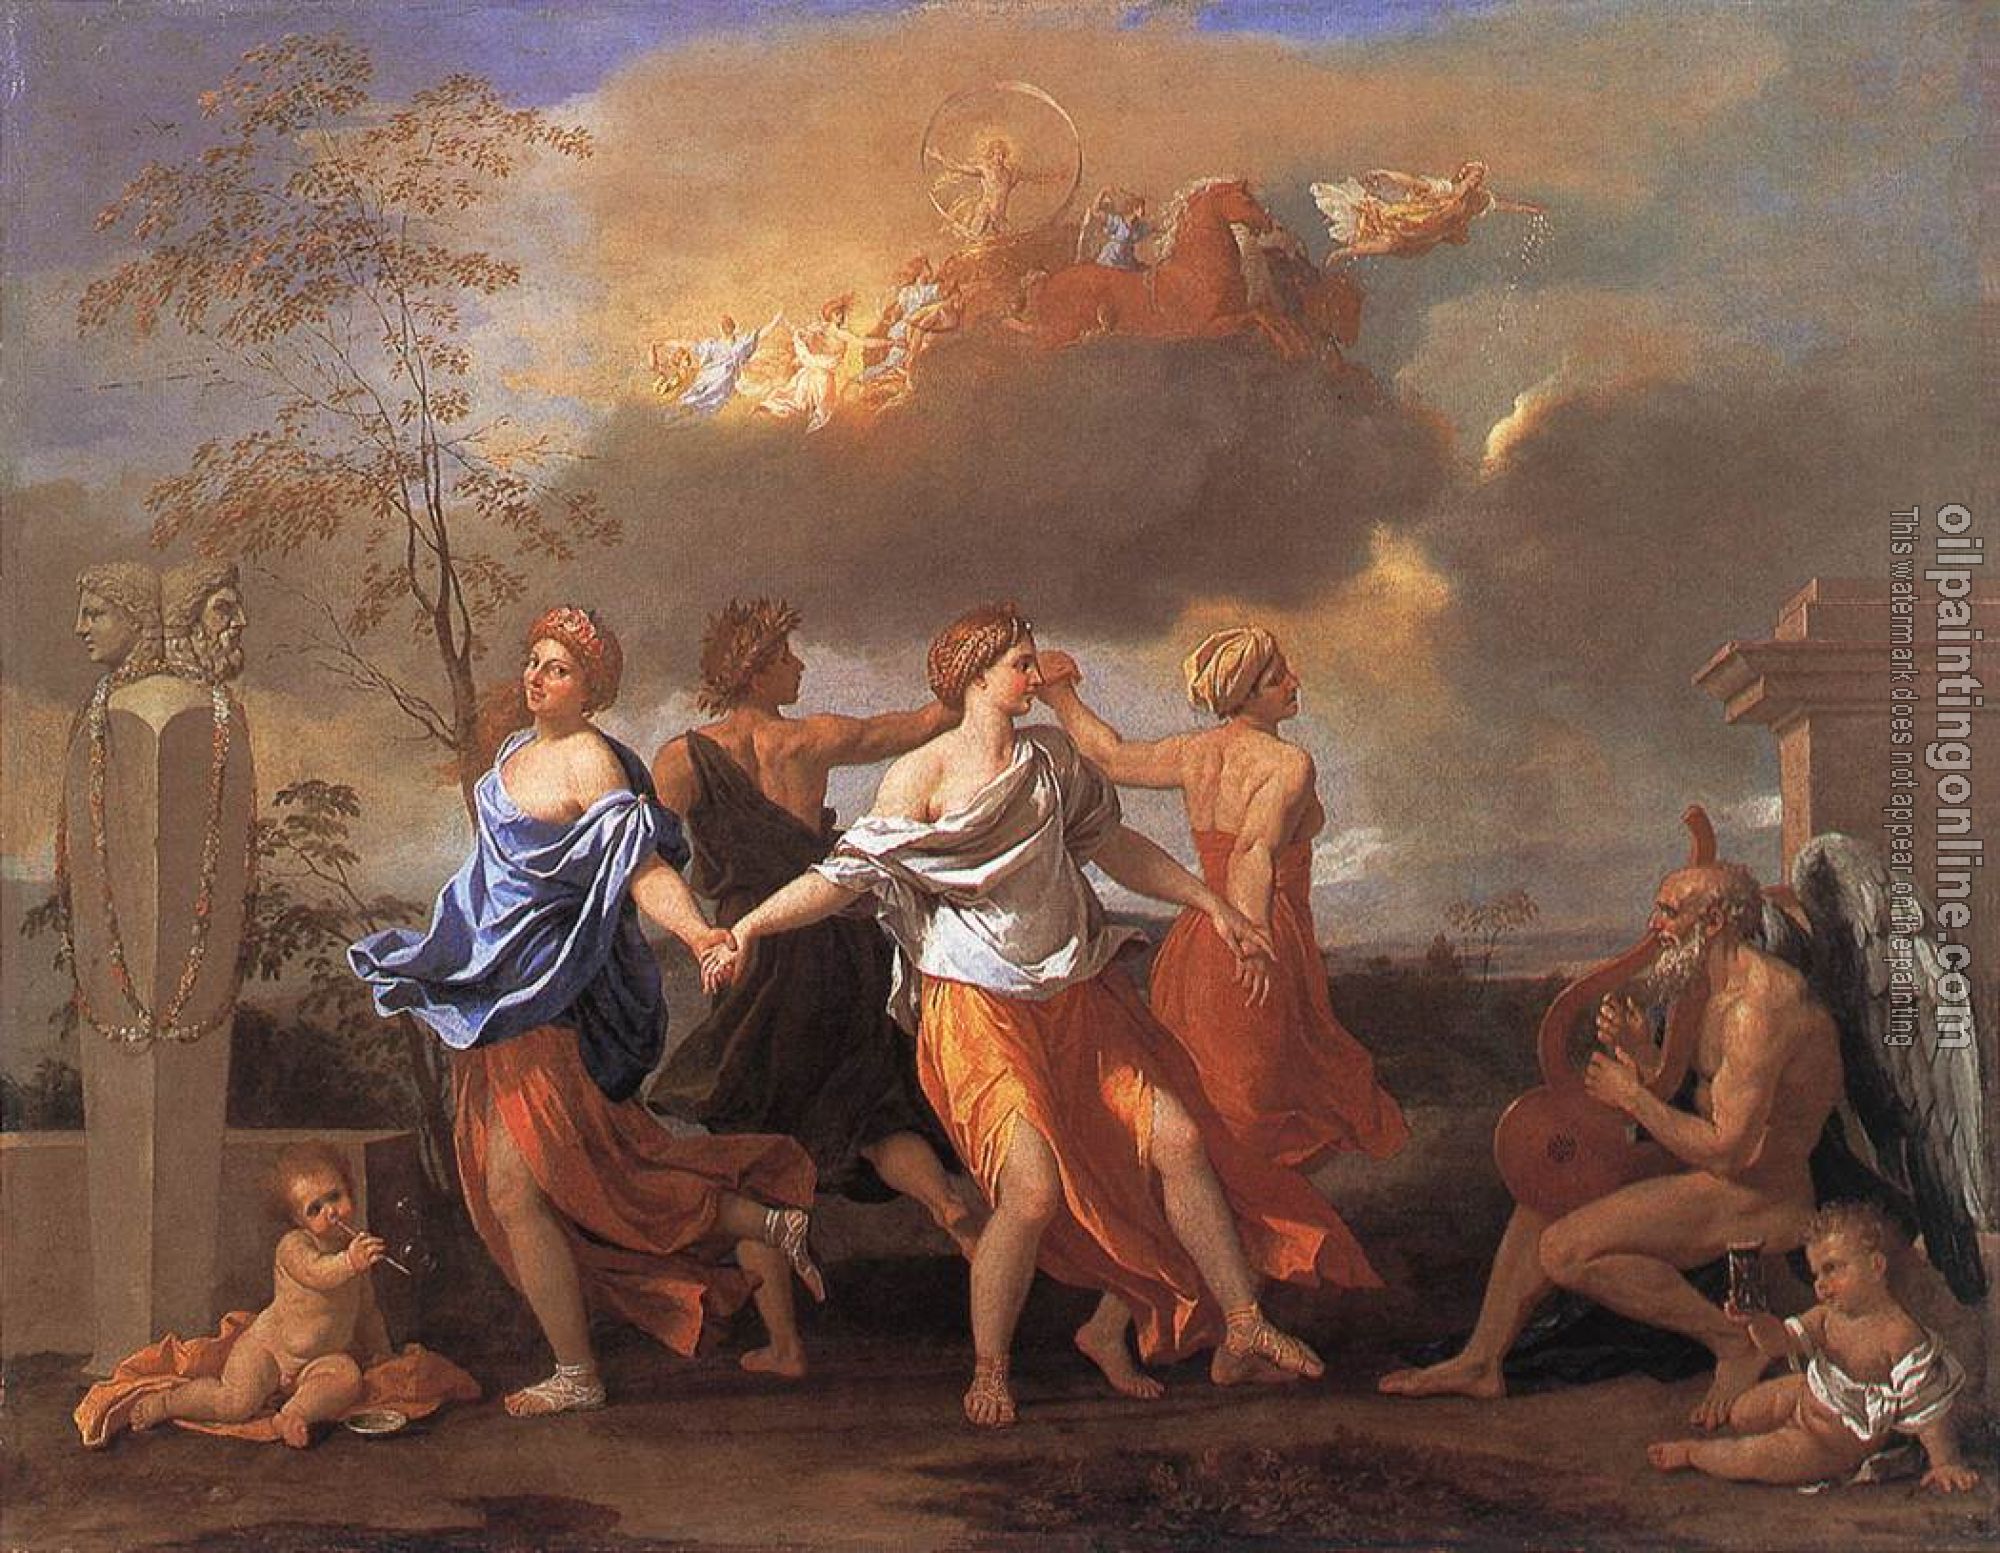 Poussin, Nicolas - Dance to the music